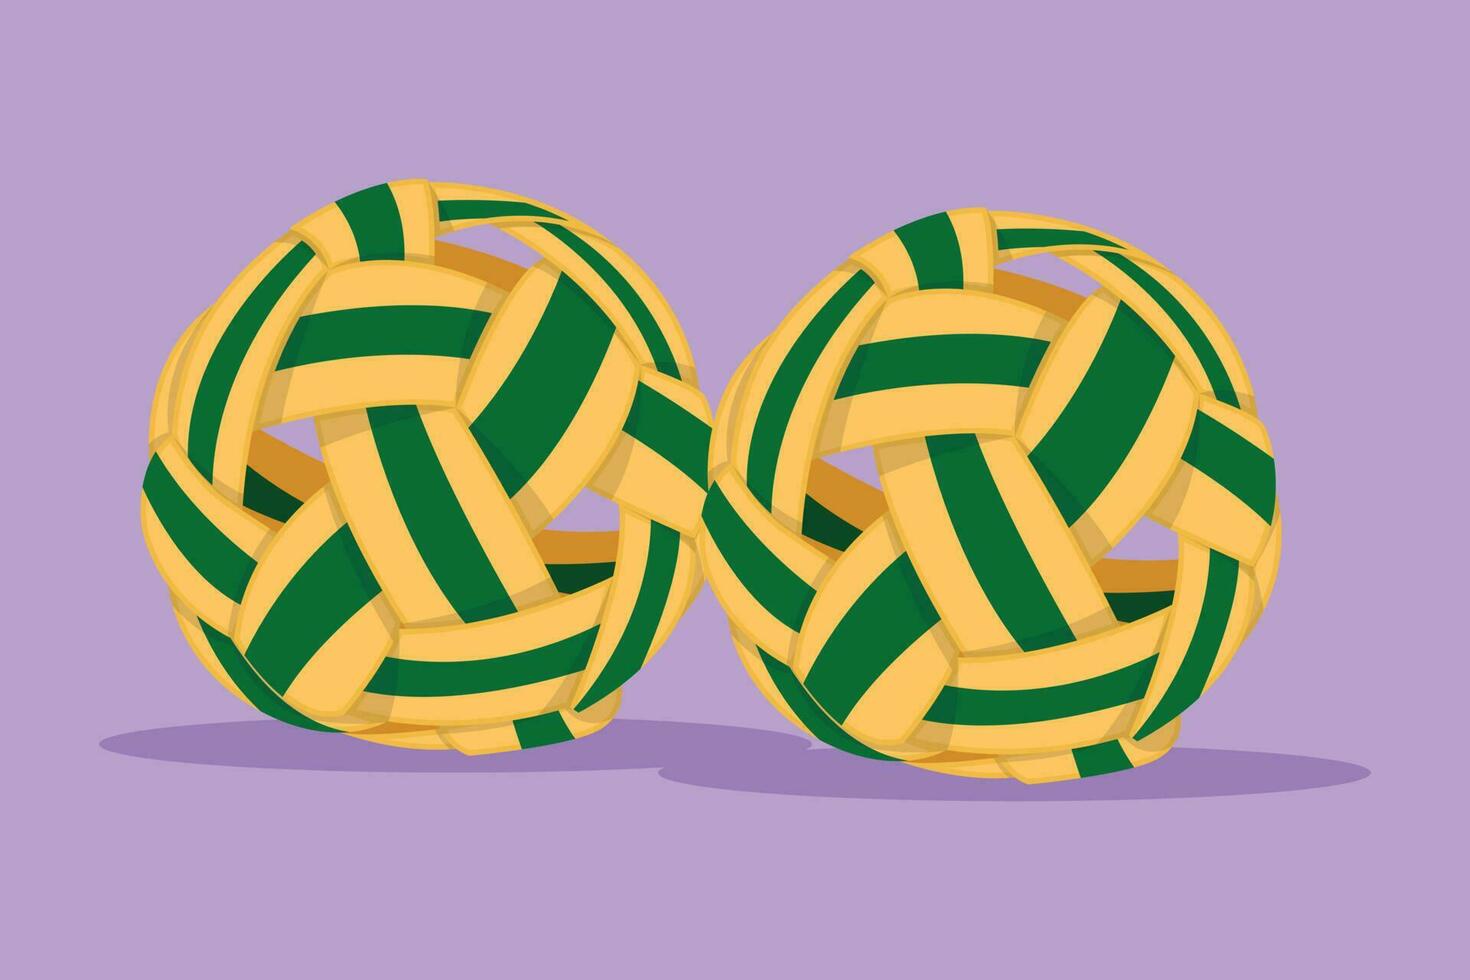 Cartoon flat style drawing stylized sepak takraw ball or rattan ball logo, symbol. Scissor kick. Team sport competition, tournament, South East or Asian sport game. Graphic design vector illustration